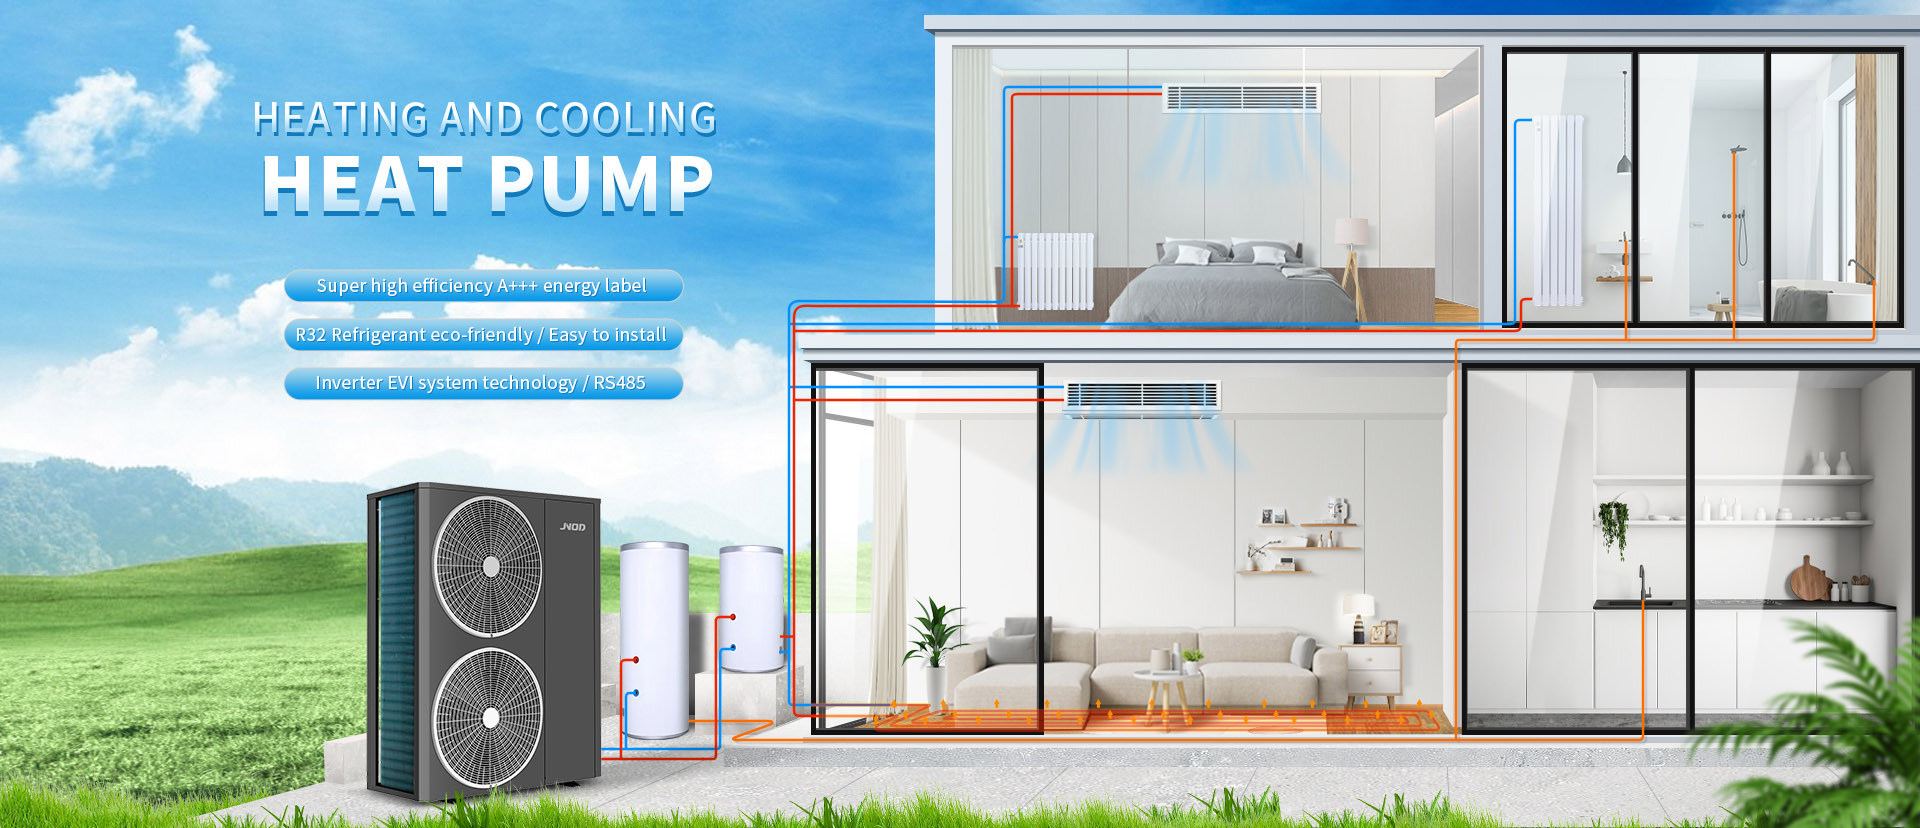 Heating And Cooling Heat Pump manufacturer